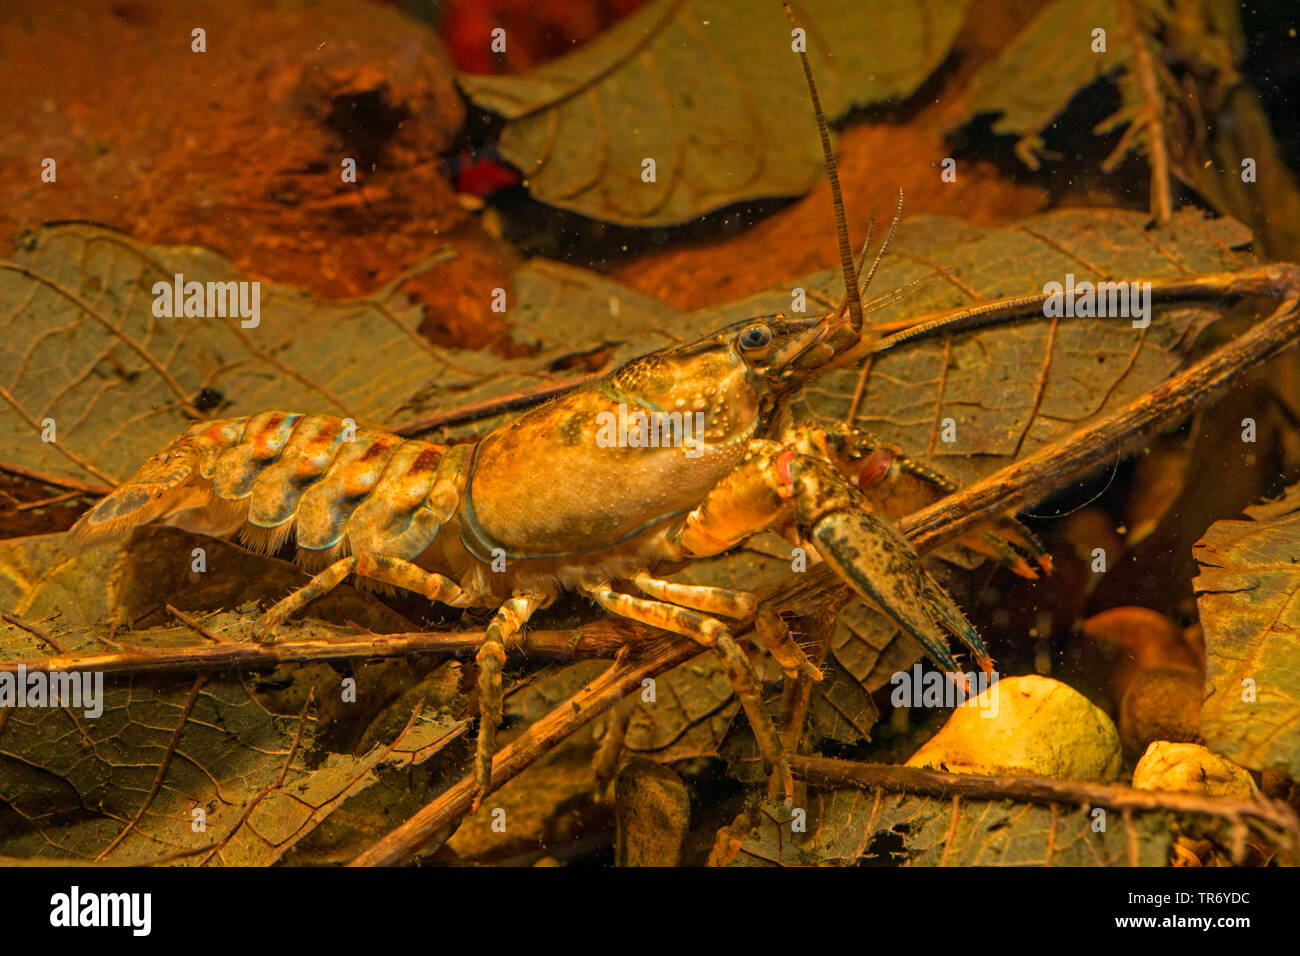 Spinycheek crayfish, American crayfish, American river crayfish, Striped crayfish (Orconectes limosus, Cambarus affinis), under water on foliage, Germany Stock Photo